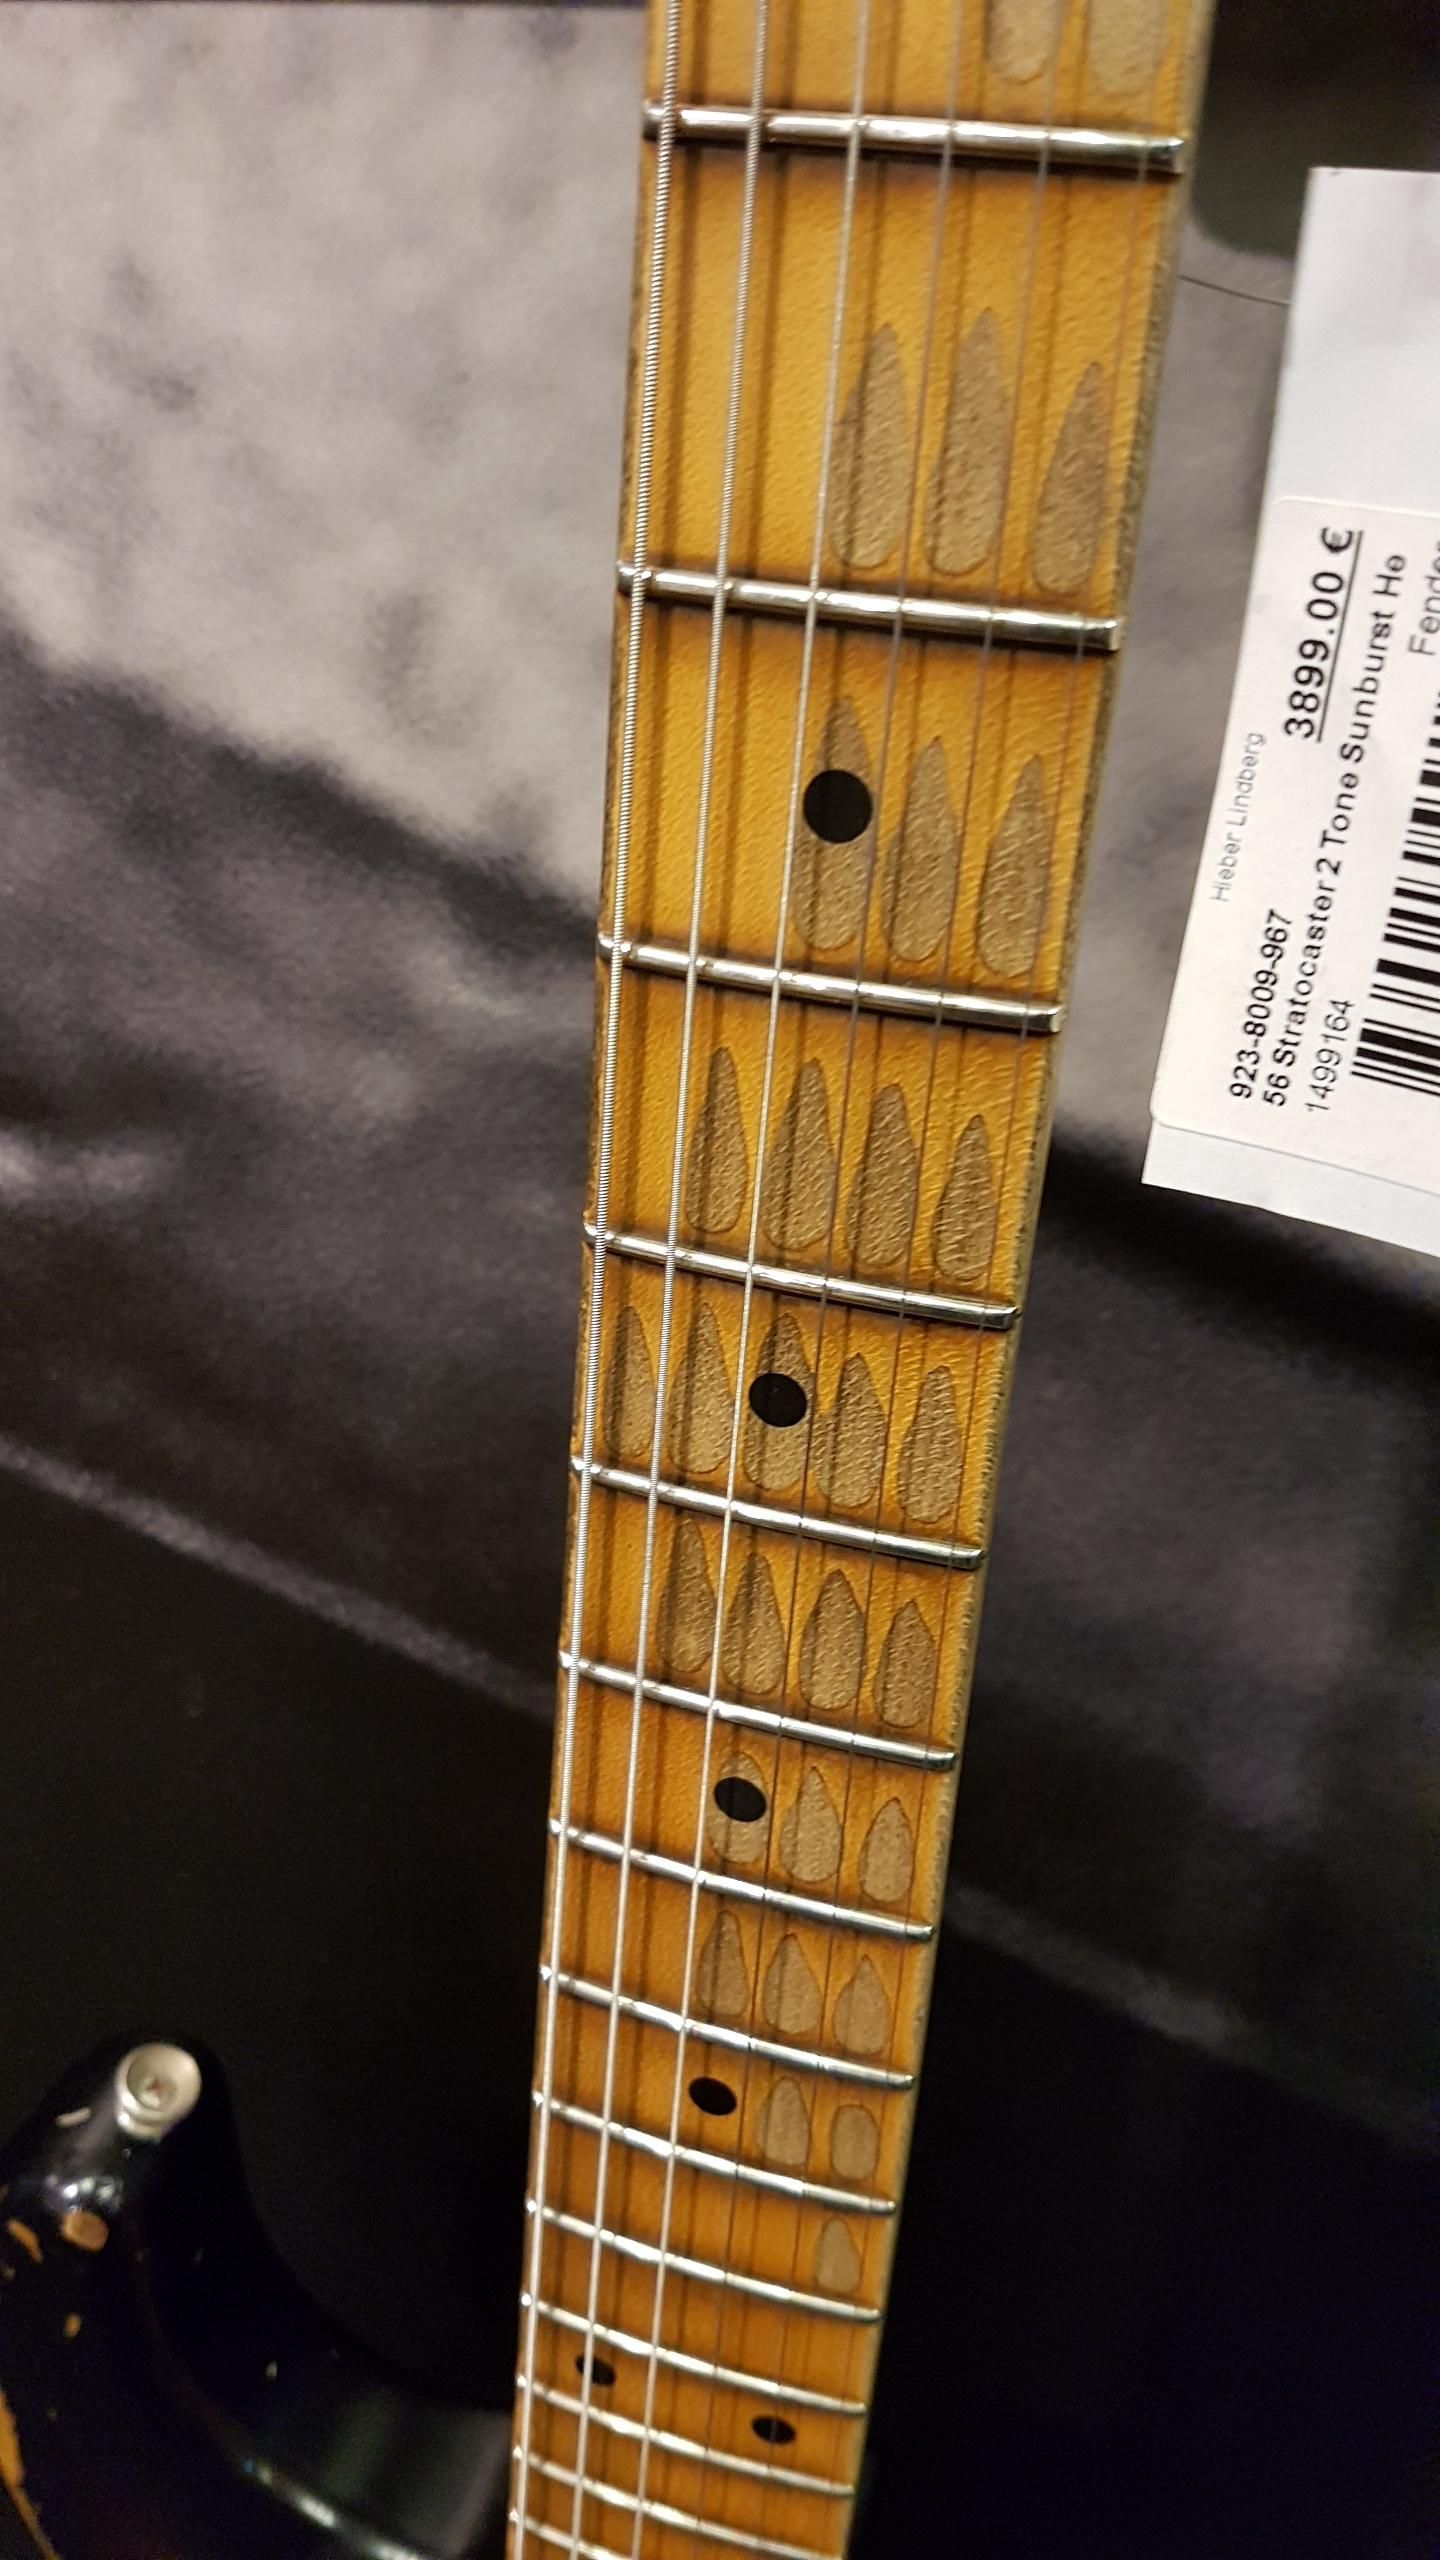 The fretboard of this 1956 Fender Stratocaster guitar shows a frequency distribution of the notes used in its 60 year life.